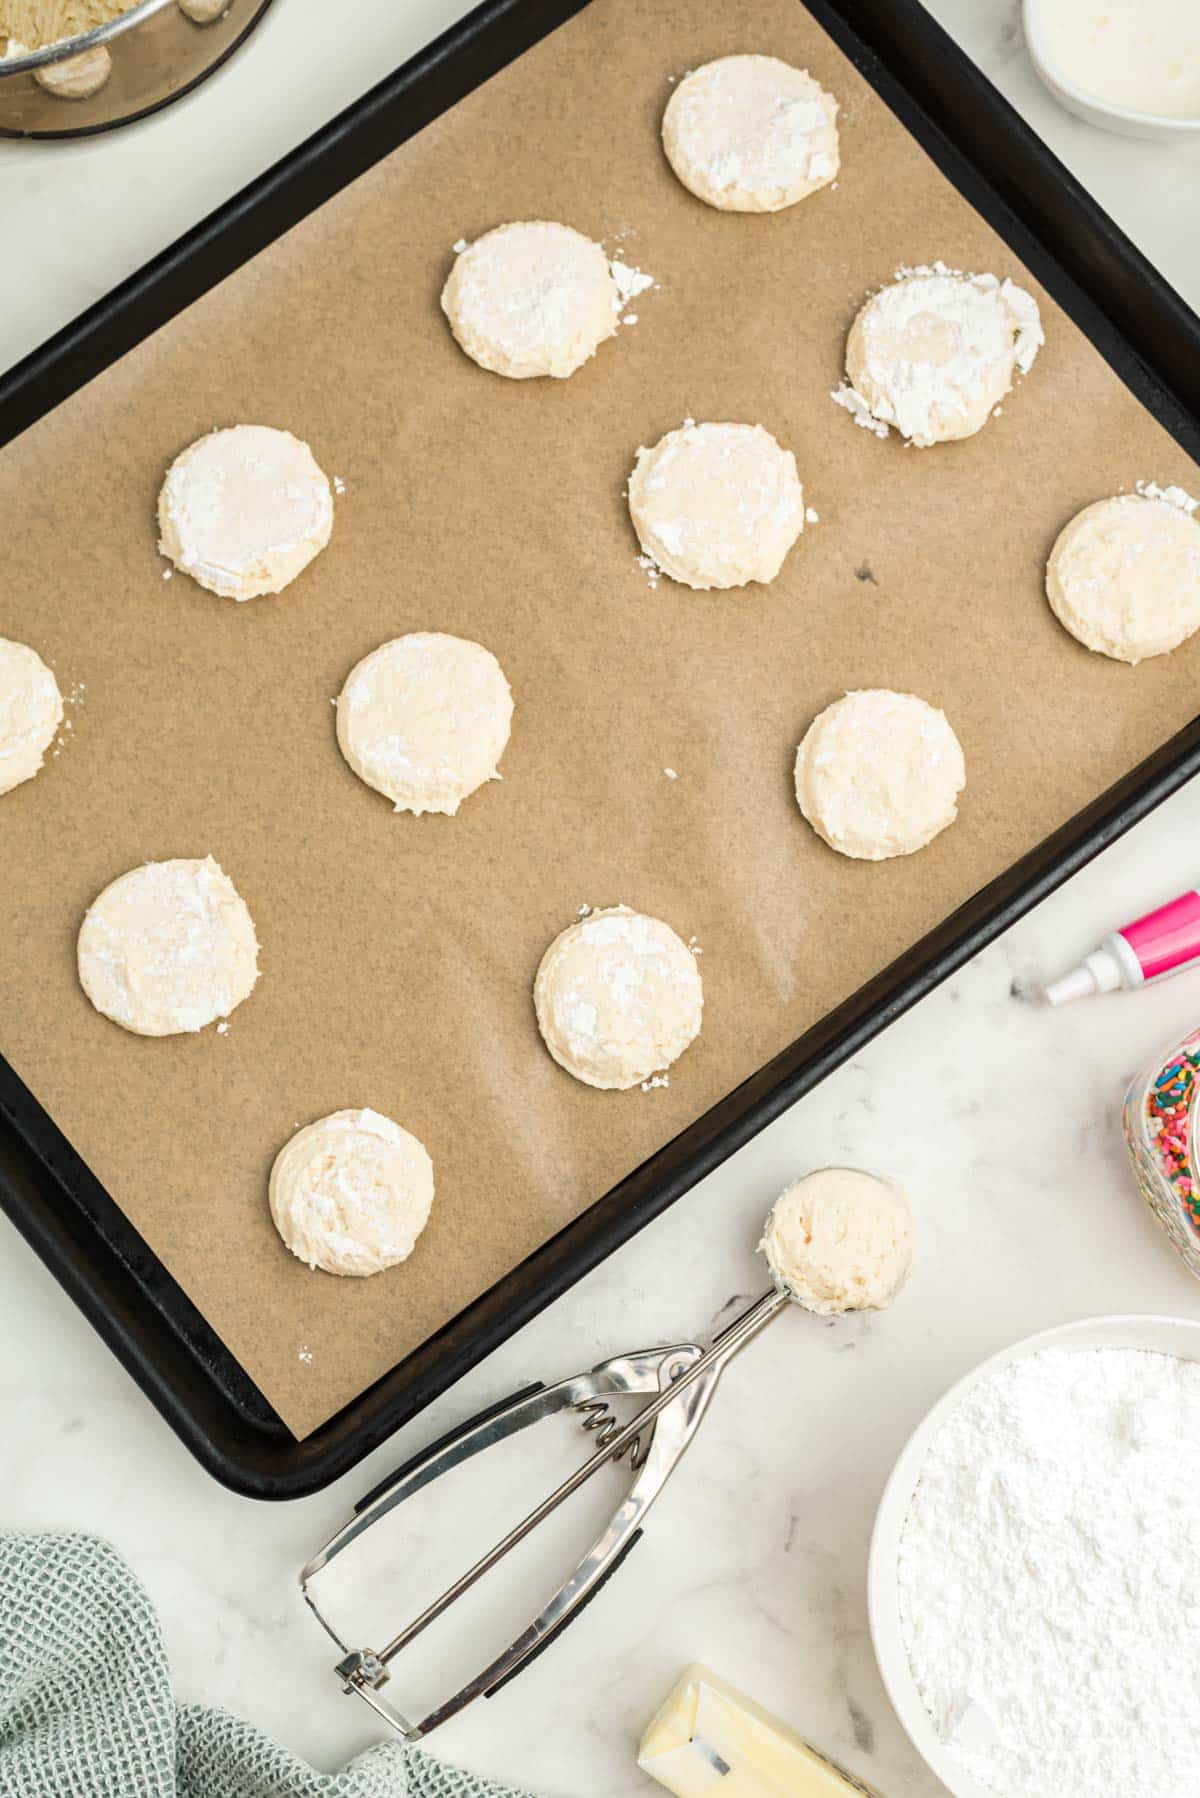 A baking sheet with cookies and ingredients on it.